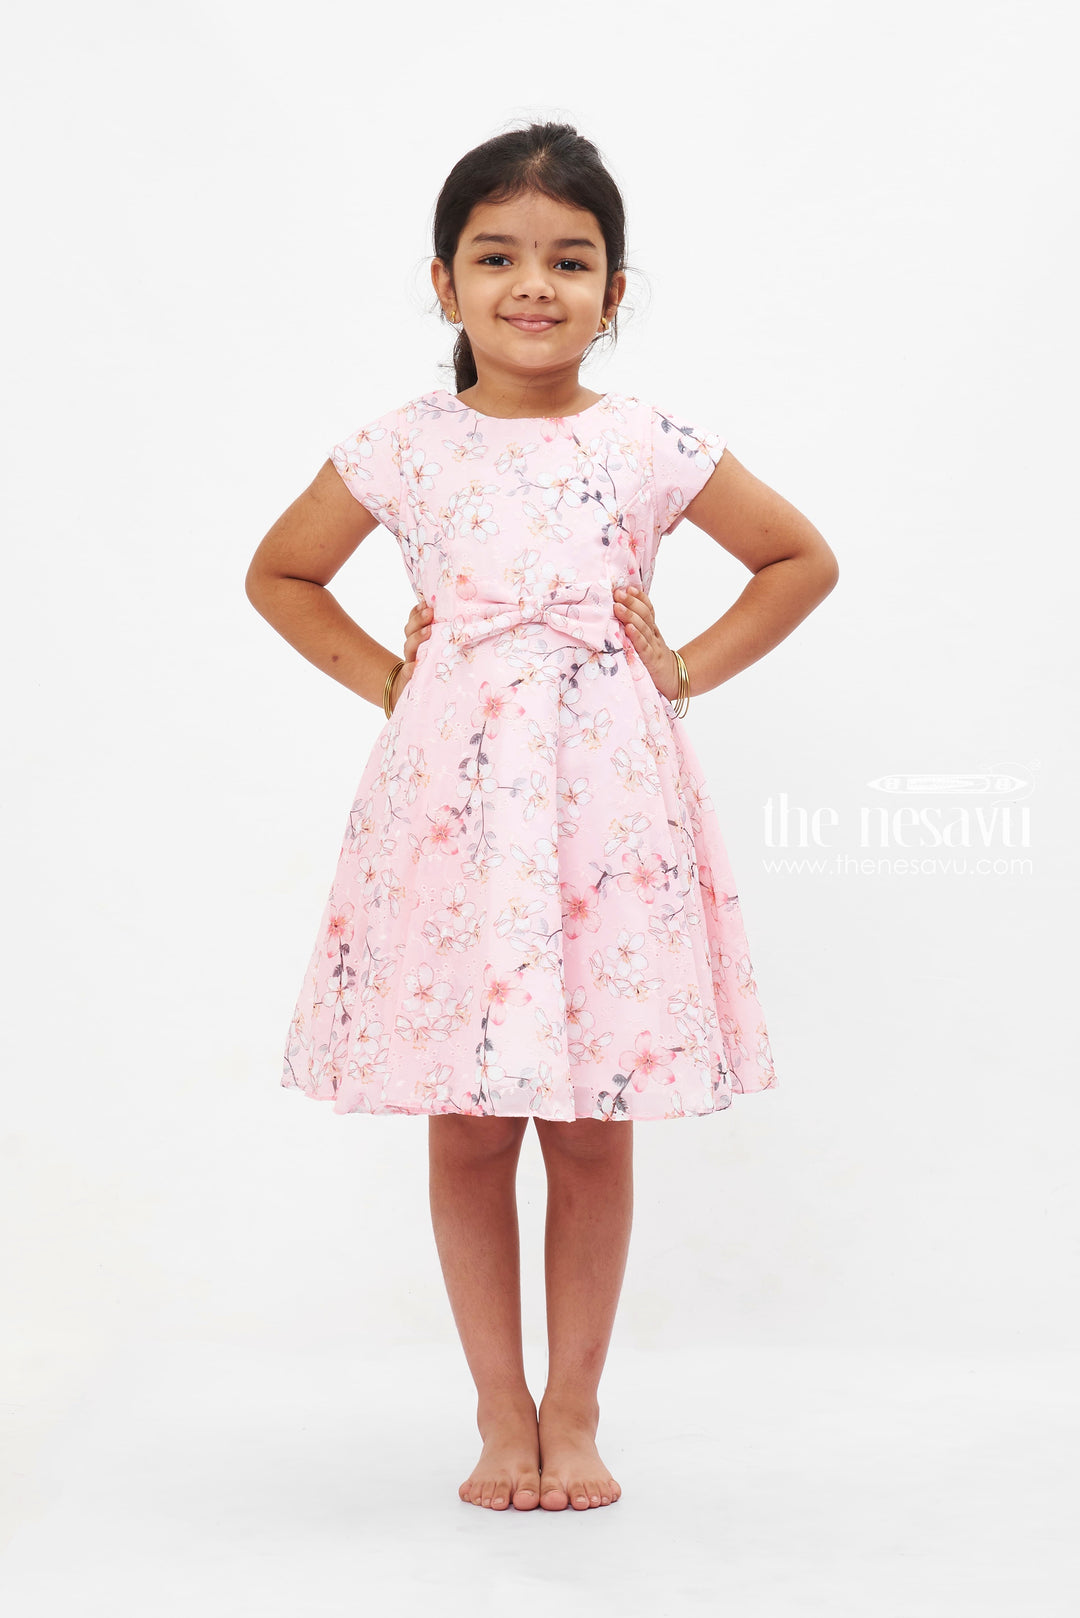 The Nesavu Girls Fancy Frock Pink Sakura Charm Frock: Girls' Blossom Print Dress with Bow Detail Nesavu 16 (1Y) / Pink GFC1189A-16 Girls Pink Cherry Blossom Dress | Cap Sleeve Frock with Bow | Spring Party Attire | The Nesavu